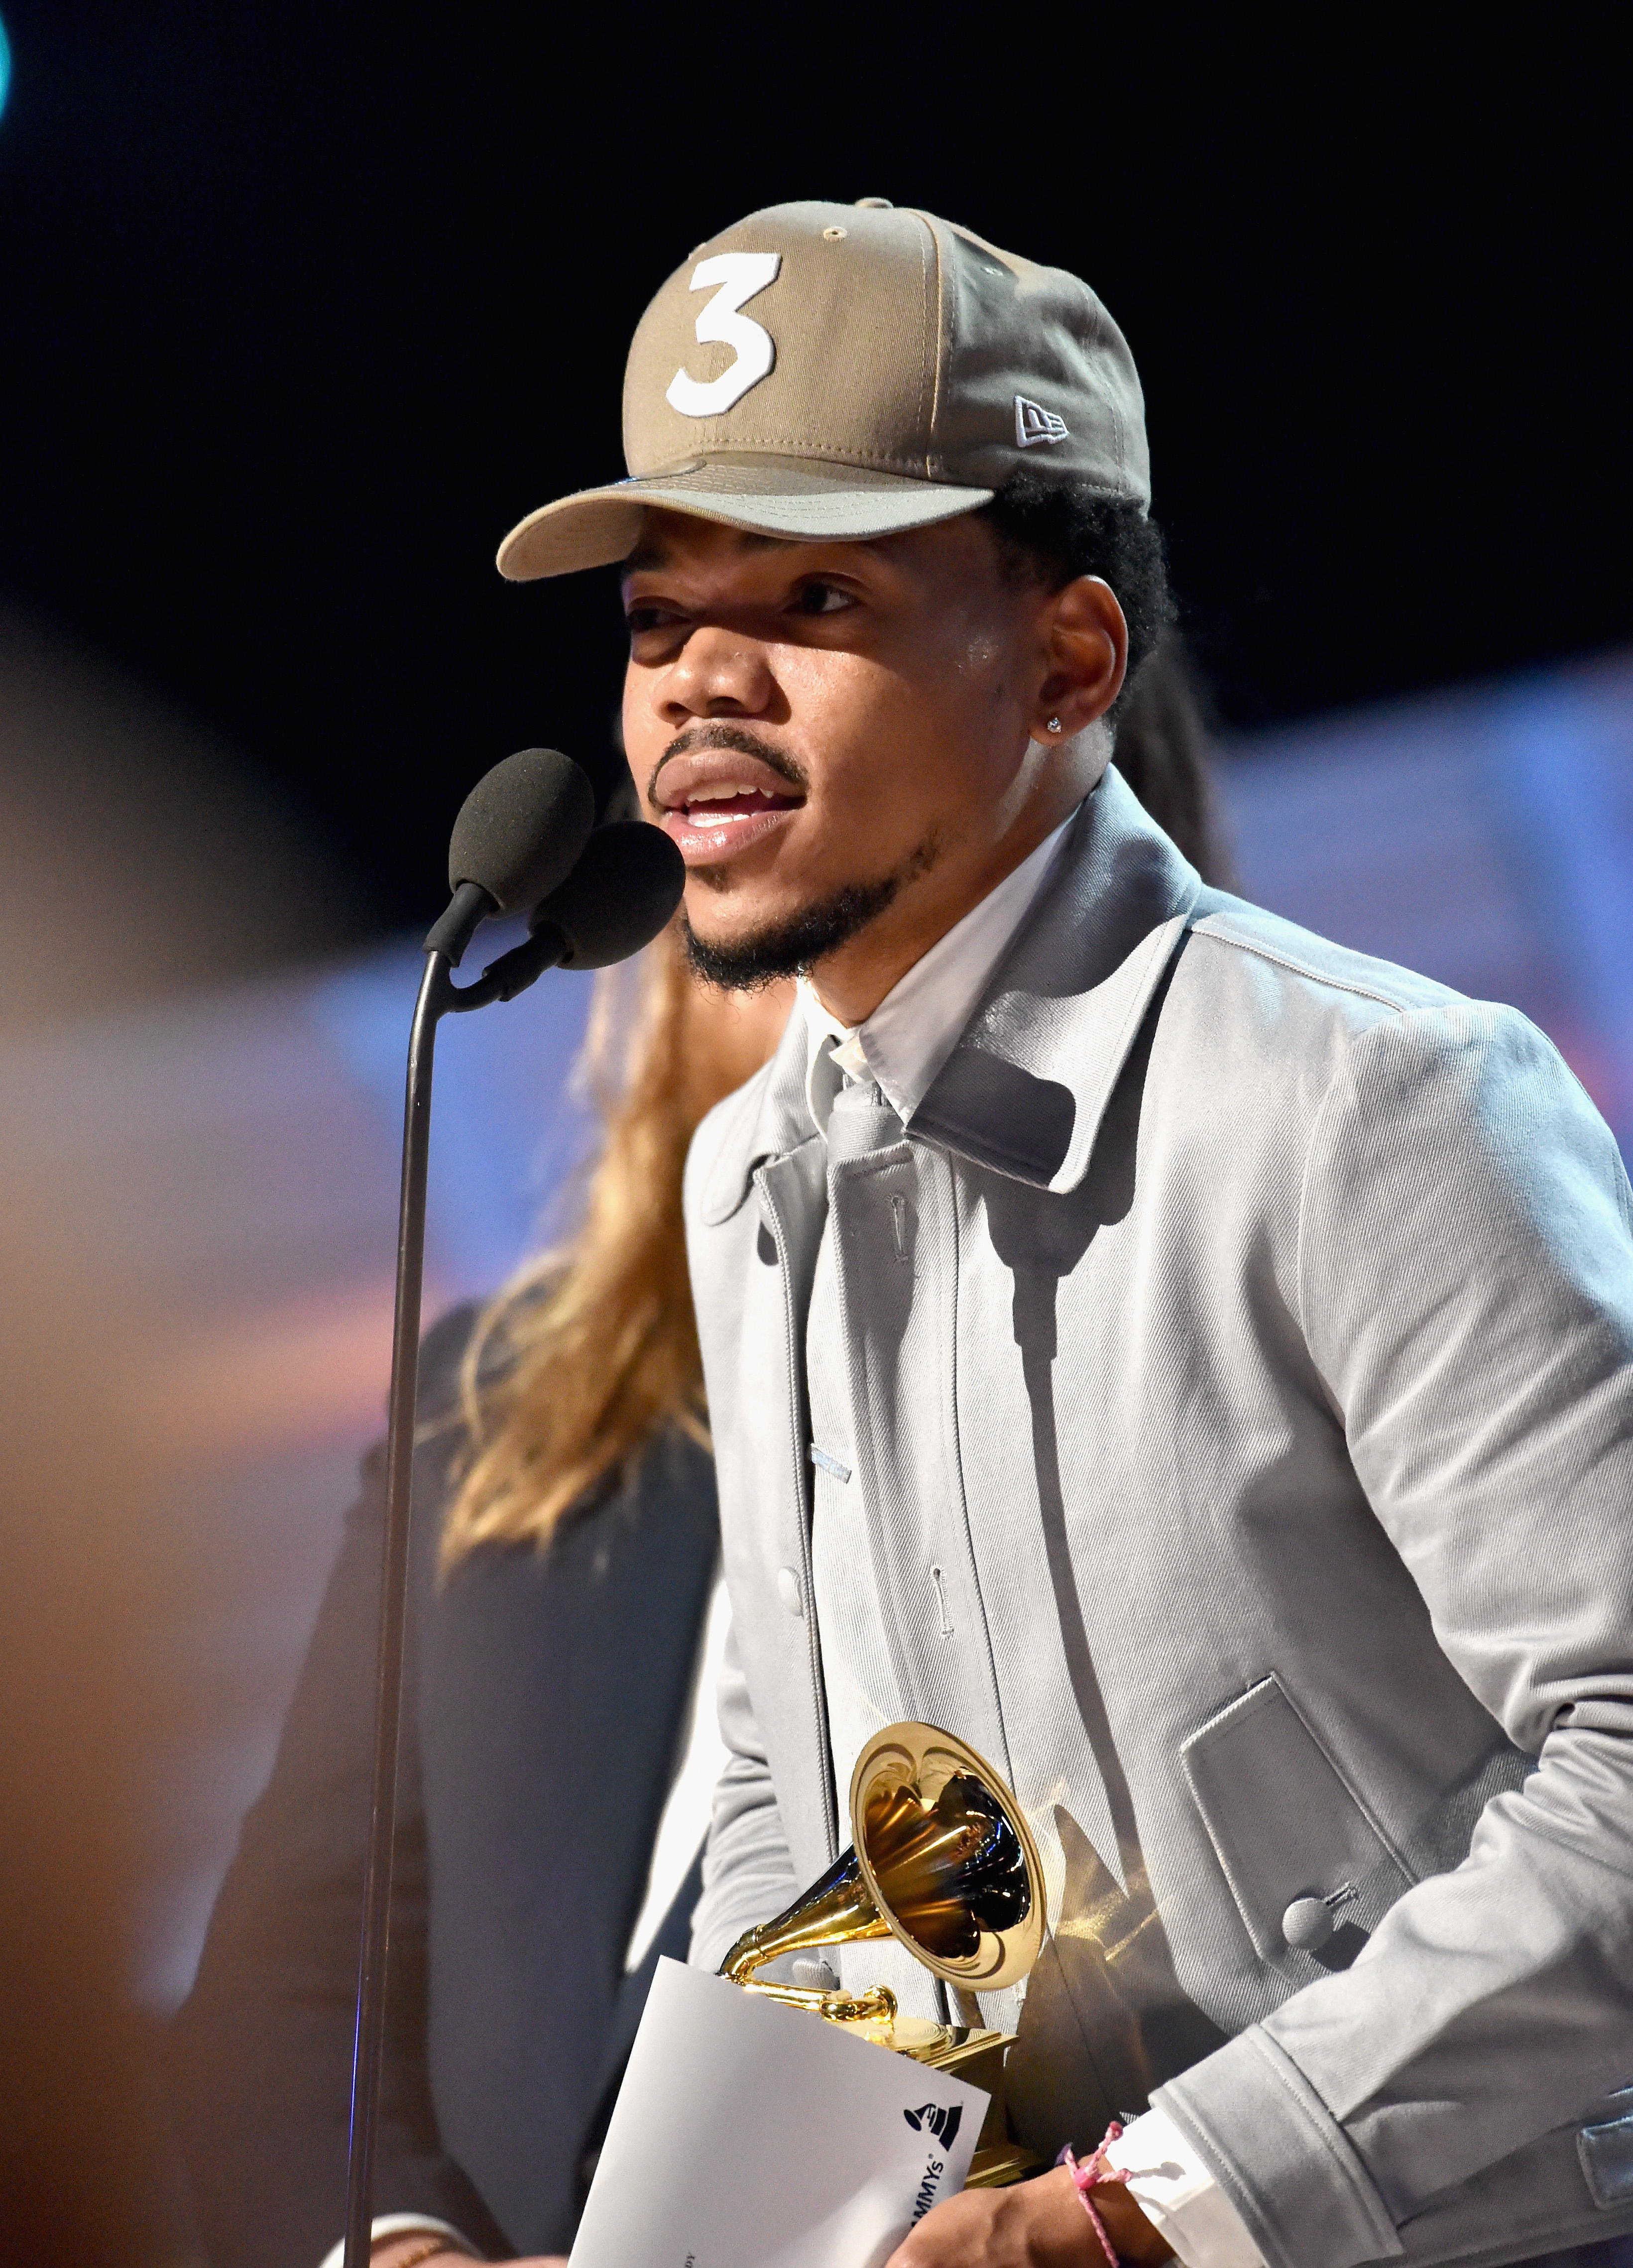 Chance the Rapper accepting his Grammy